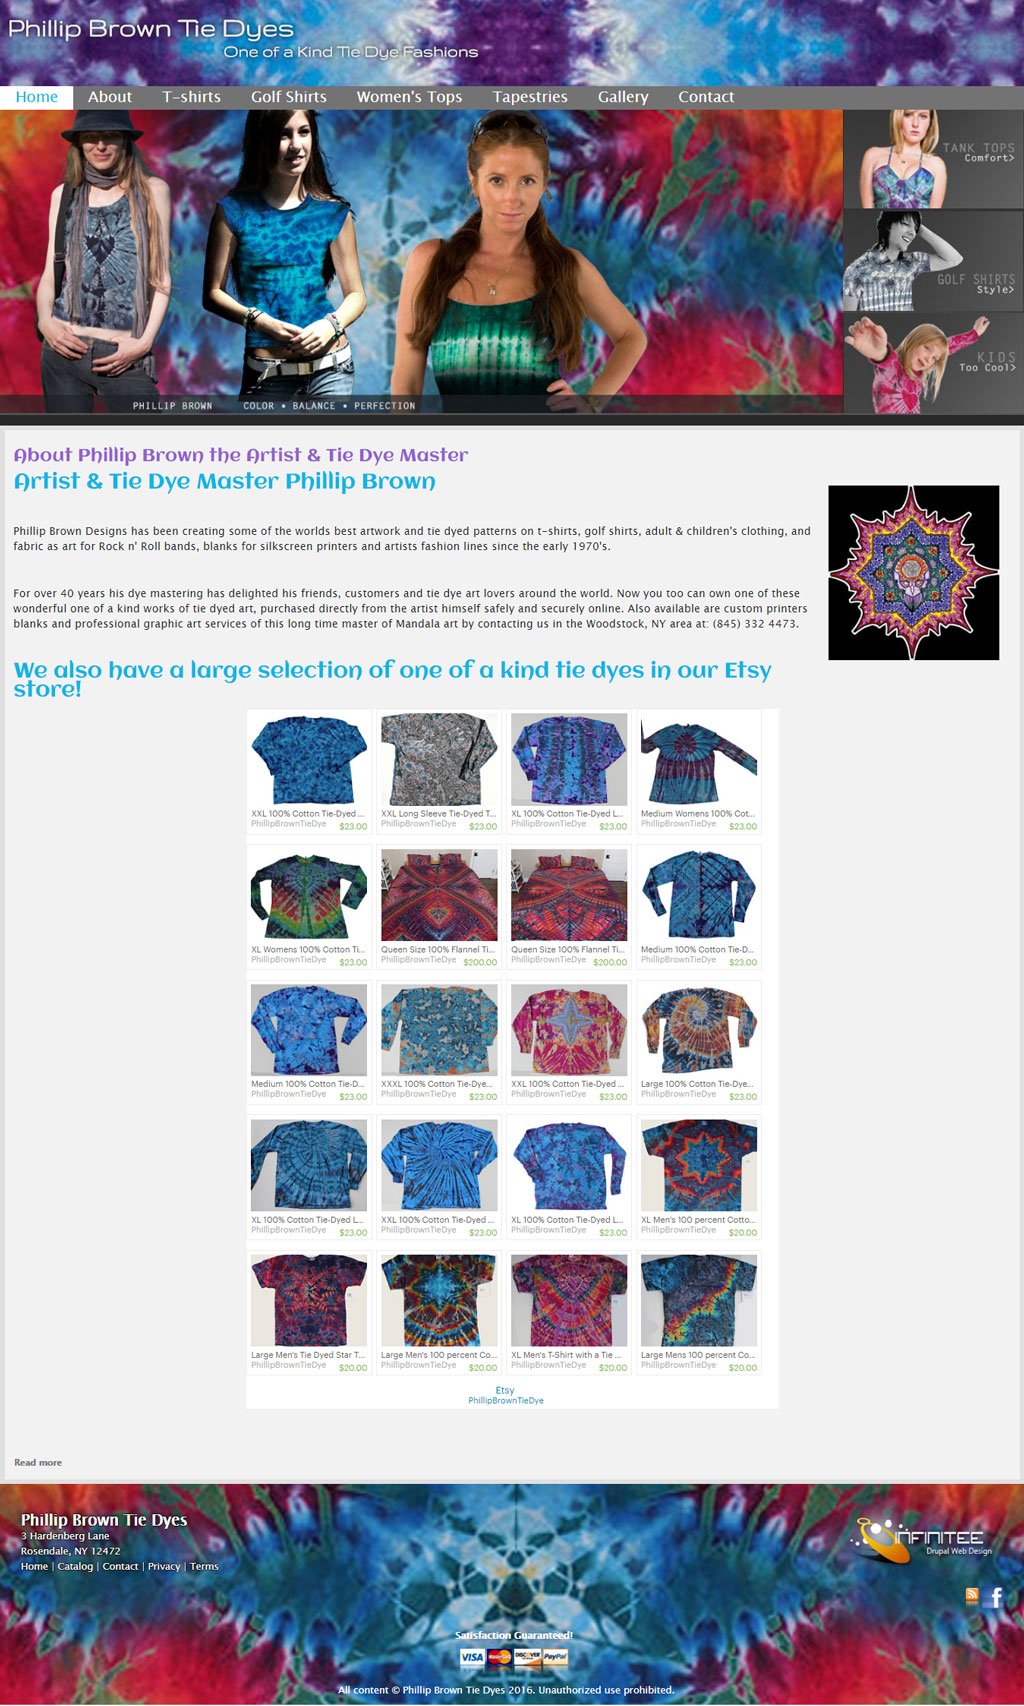 The New Redesigned Phillip Brown Tie Dyes Website